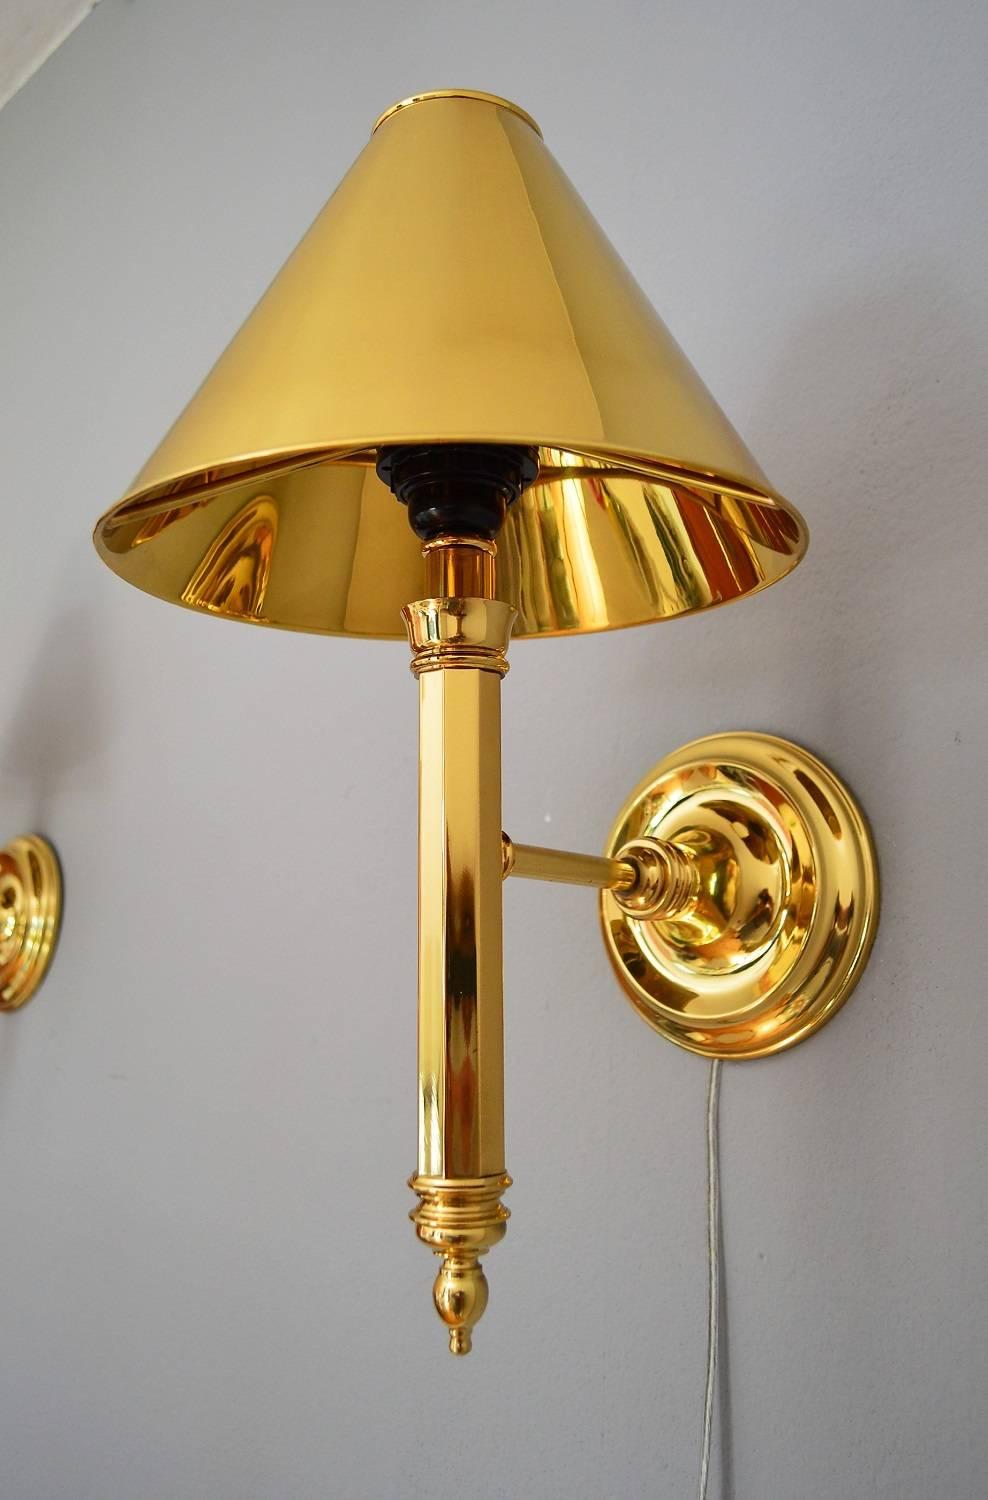 Beautiful set of two wall sconces made completely of brass, also the lamp shades.
Made in Spain, the full Hollywood Regency Style in the 1980s.
Excellent condition with smallest spots on the metal handles, please see all pictures.
For one Edison